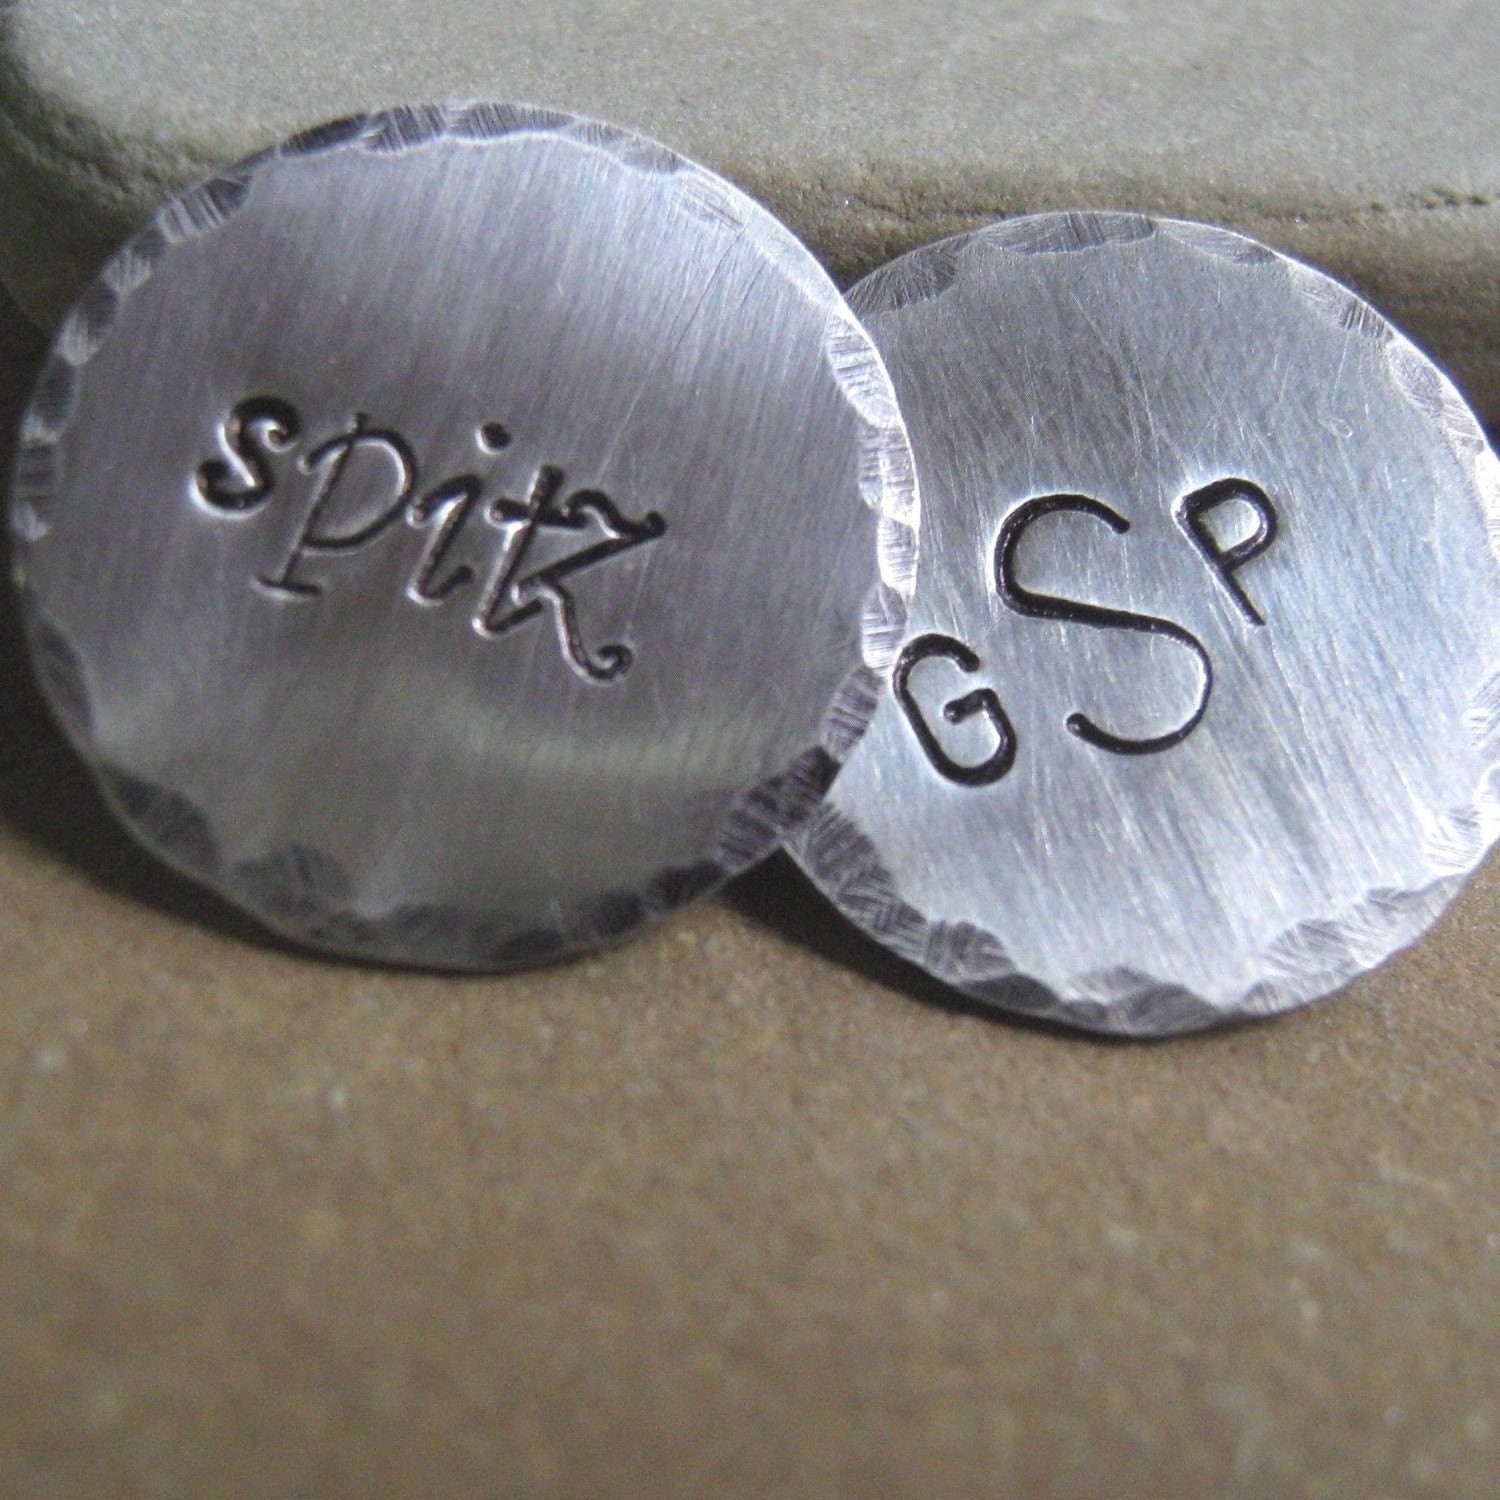 Customized ball markers